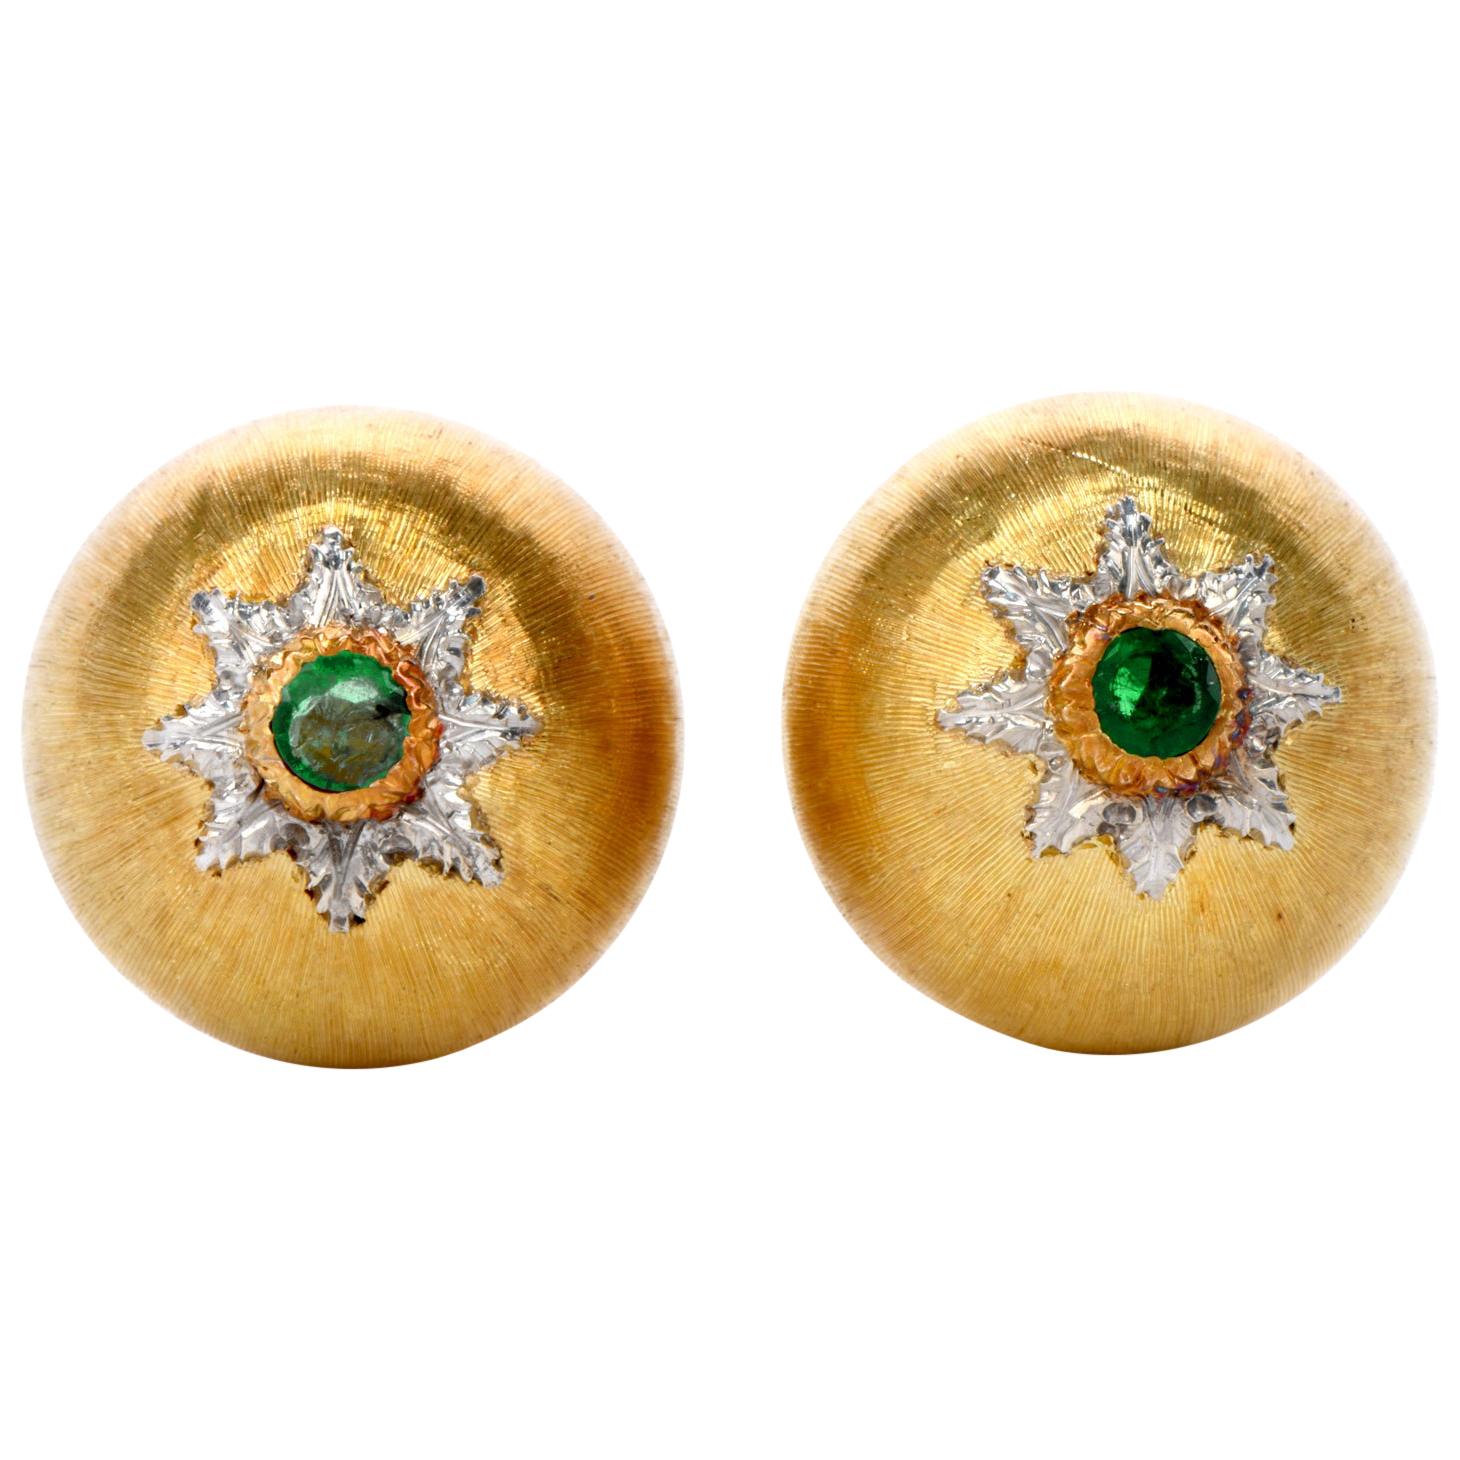 Stunning Buccellati Earrings in 18k yellow gold.

Each earring is set with one high-quality round-cut genuine Emerald totaling 0.30 carats.

Earrings Measure 15mm wide.

Signed Buccellati, Italy, 18k.

Total Weight: 14 grams

Retail Approx.